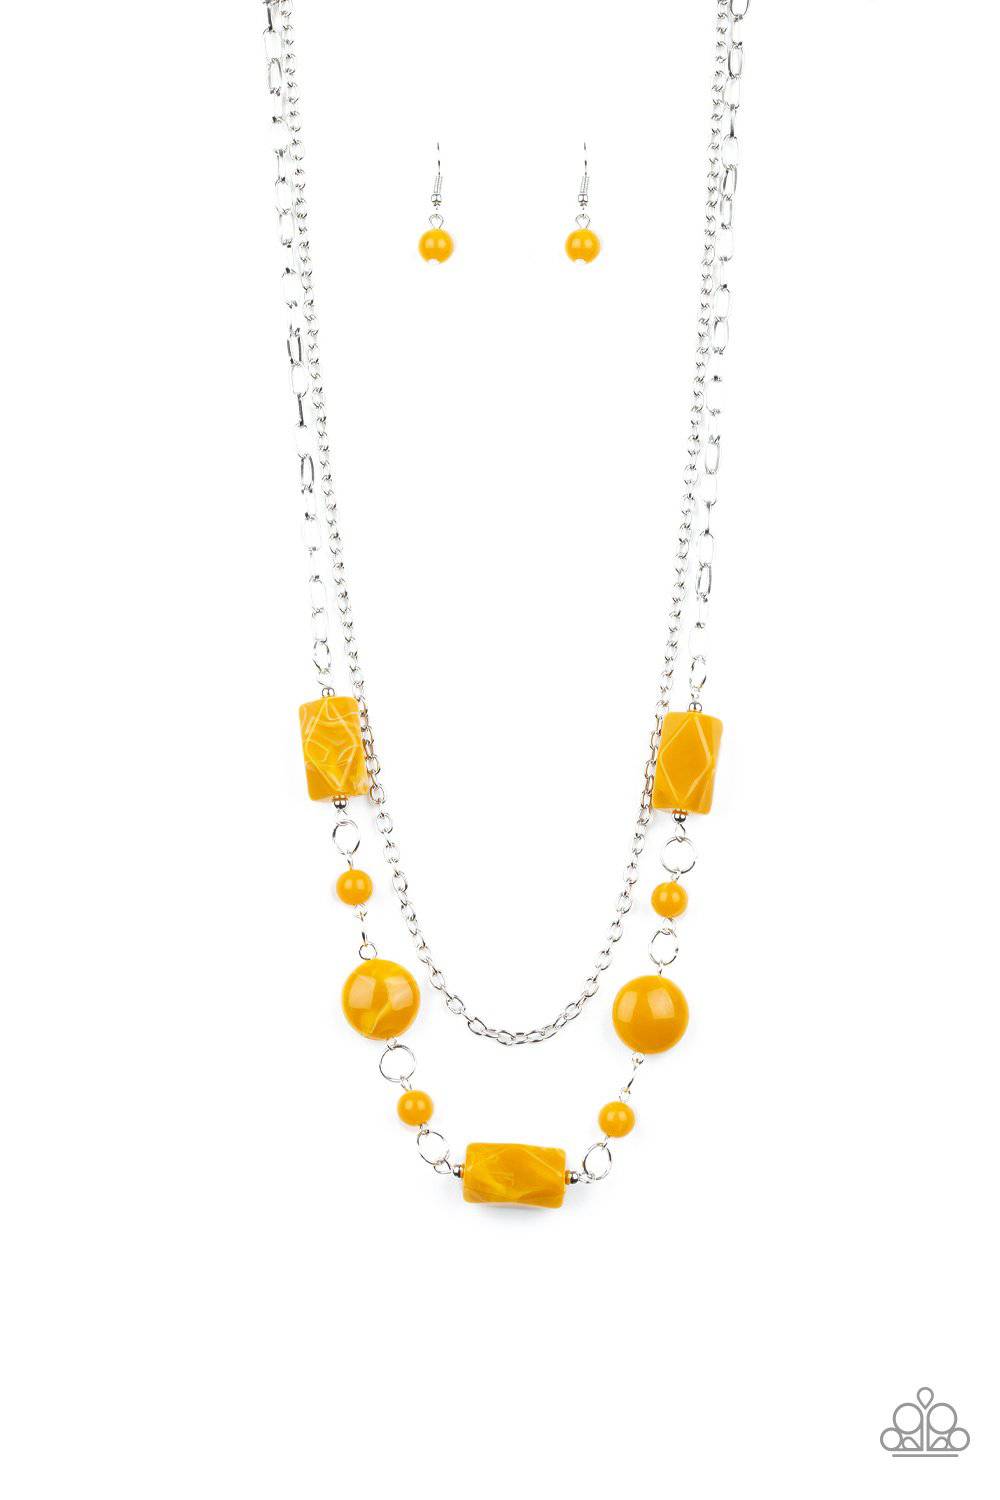 Colorfully Cosmopolitan - Yellow Acrylic Bead Necklace - Paparazzi Accessories - GlaMarous Titi Jewels